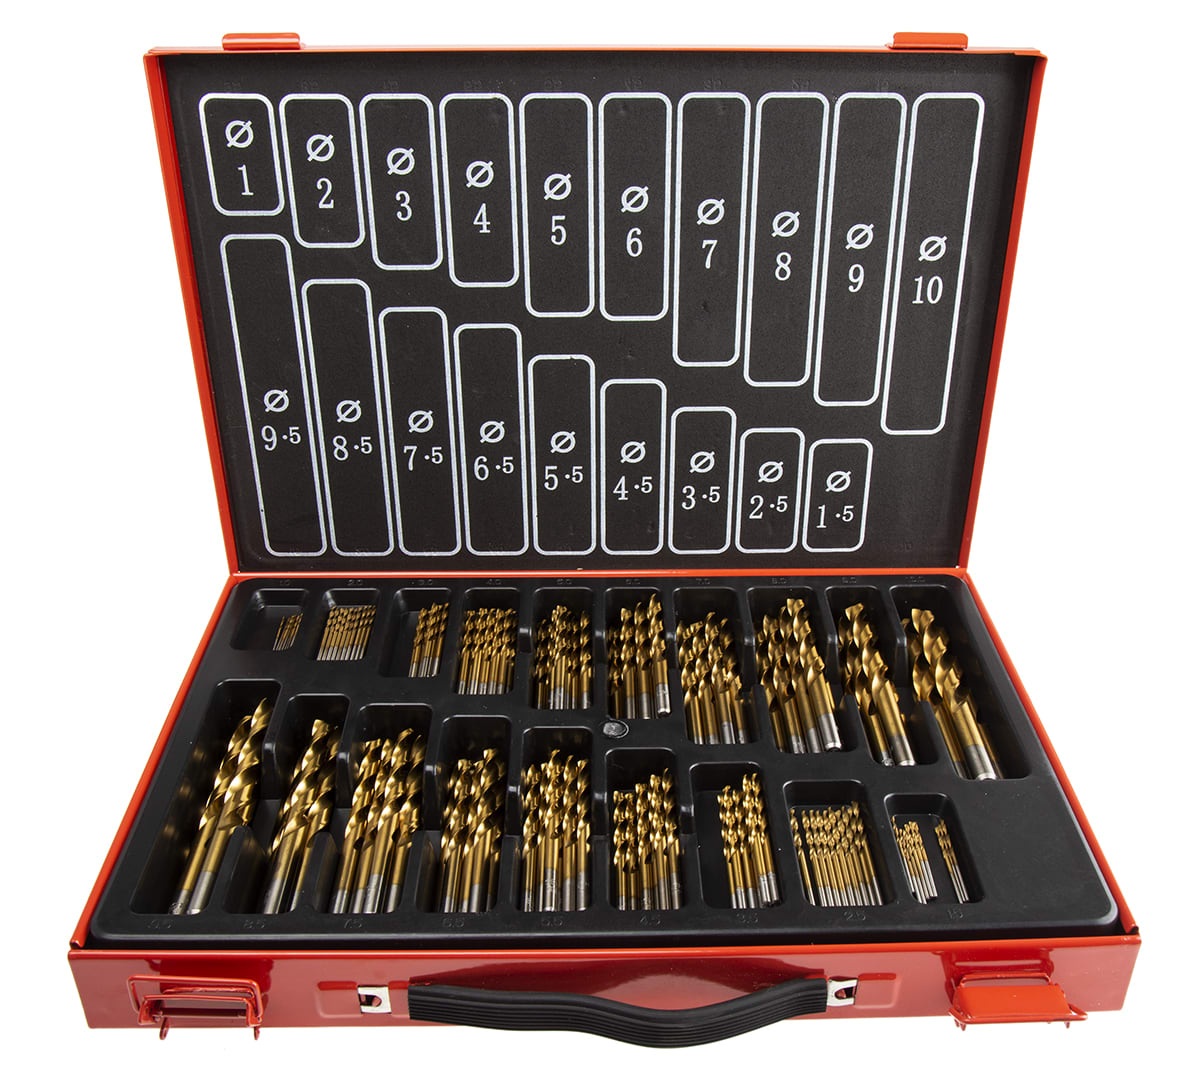 Drill Bit Sets - A Complete Buying & User Guide